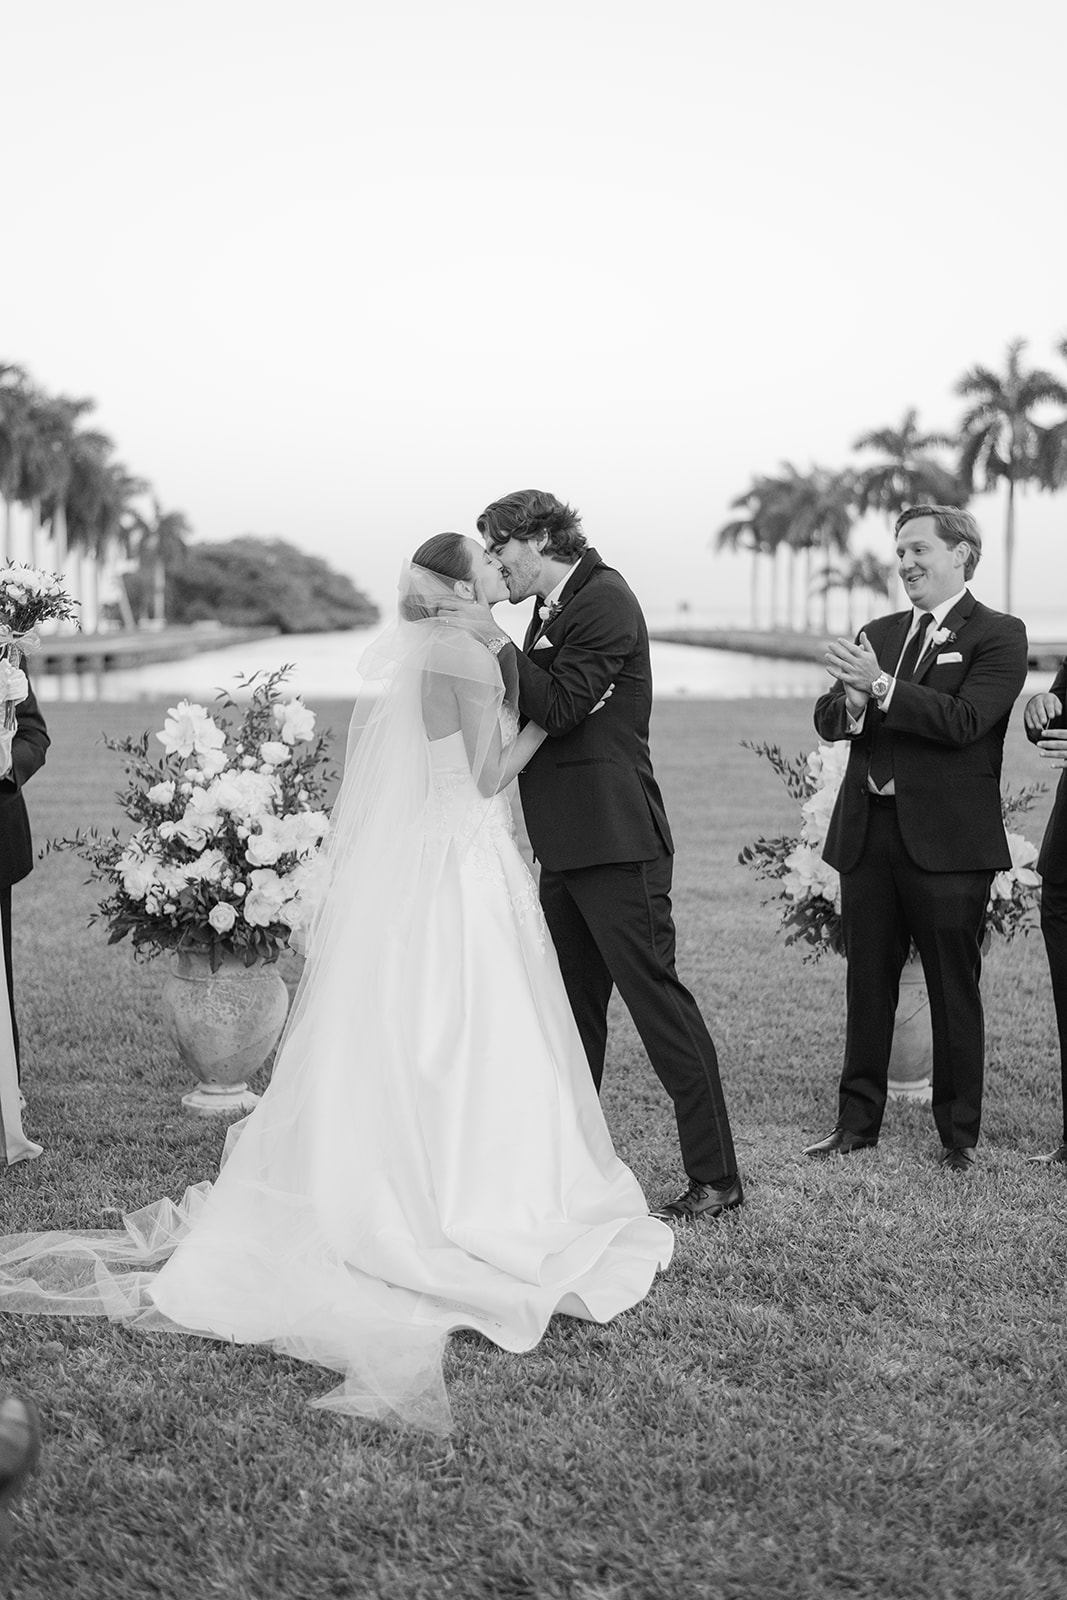 Stunning Deering Estate Wedding Photography by the top wedding photographer in Miami Florida
